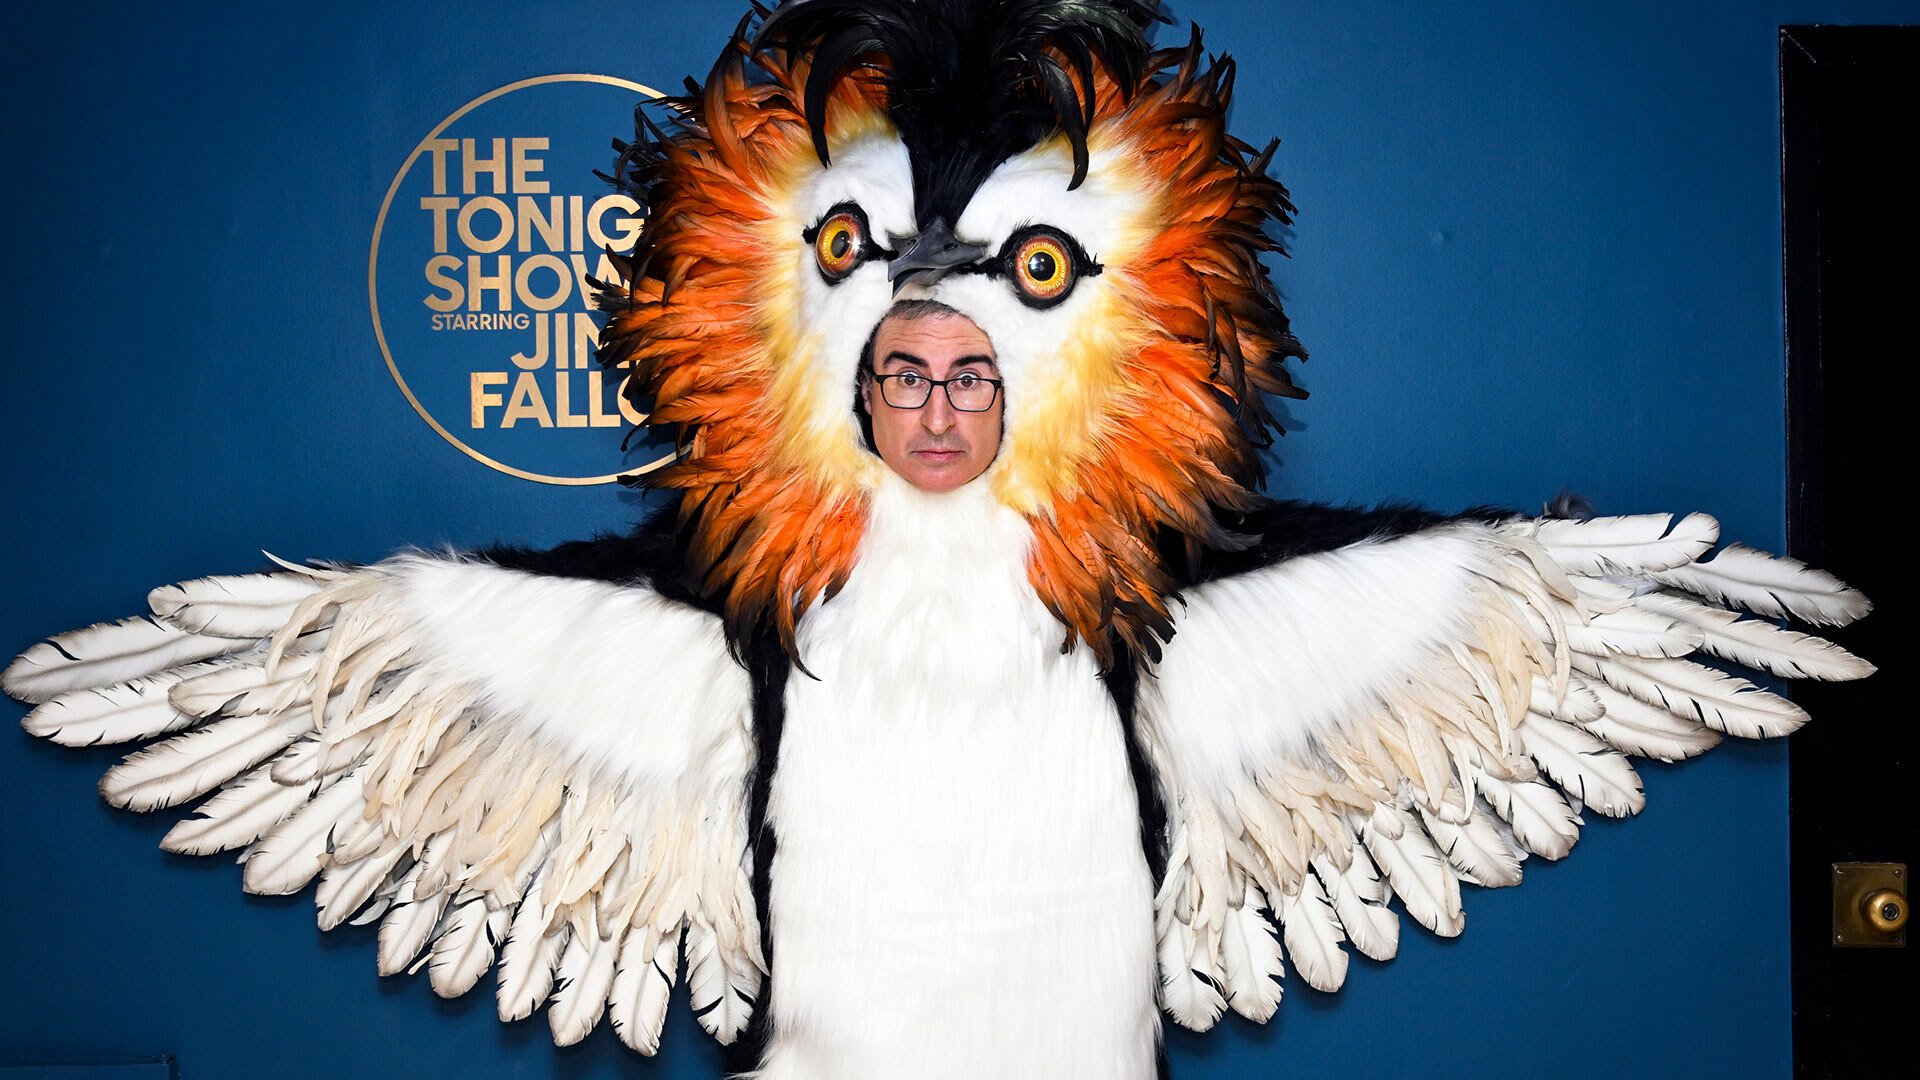 A man in glasses is dressed up as a large bird with an impressive orange plumage.